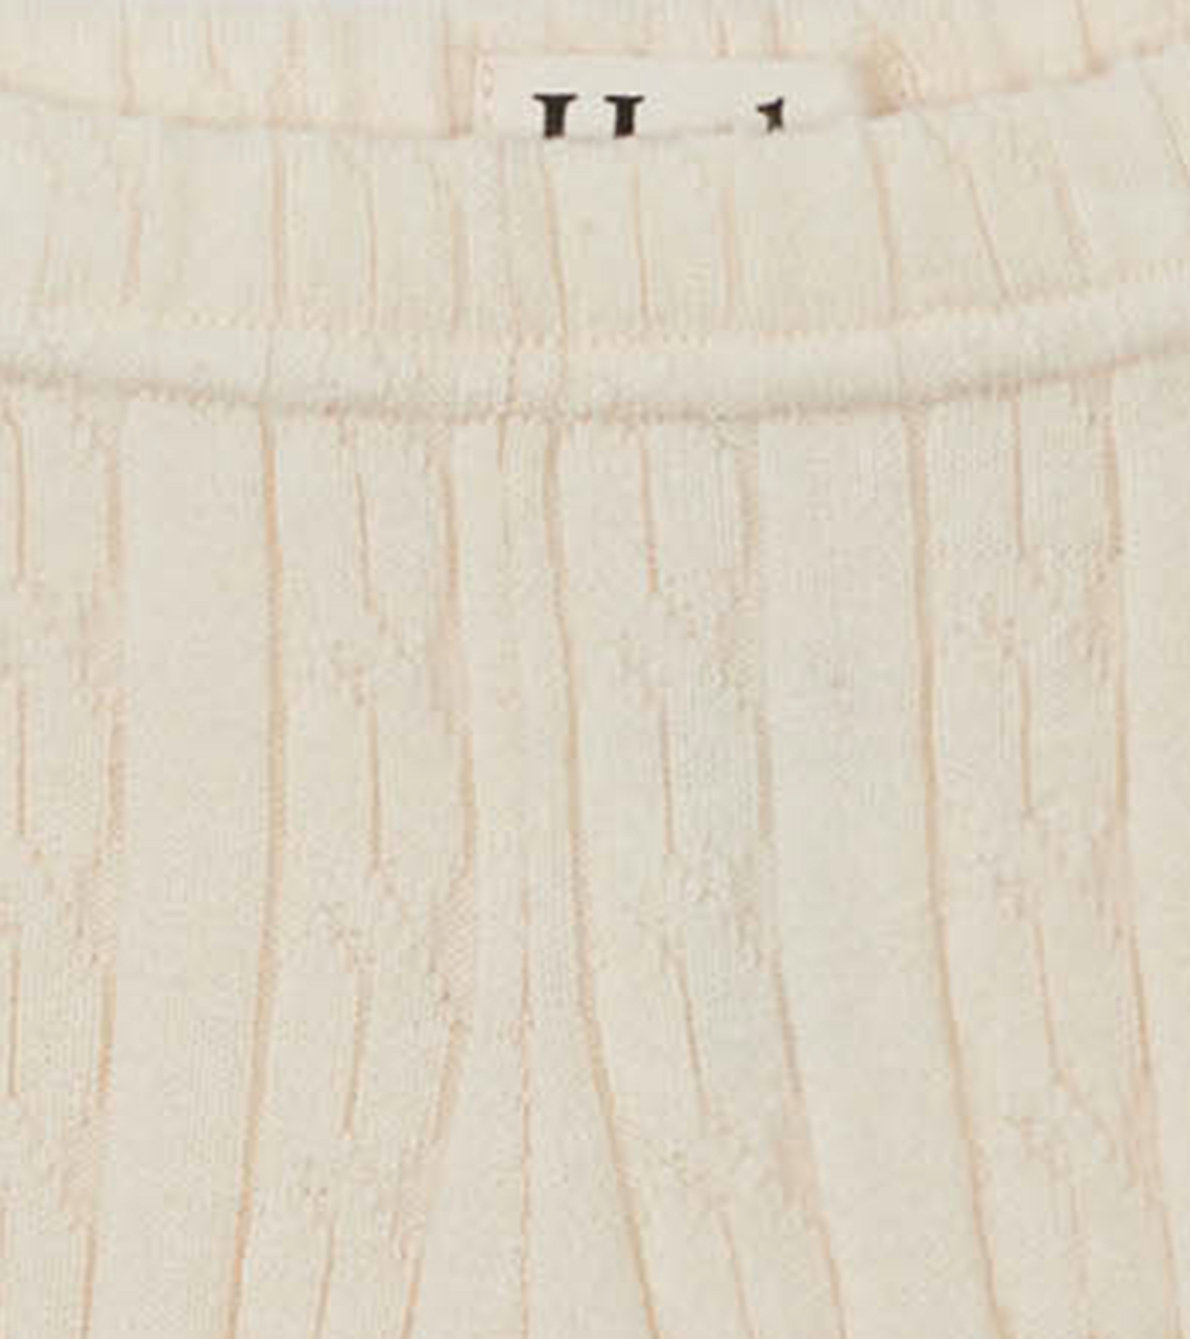 View larger image of Baby Cream Cable Knit Tights